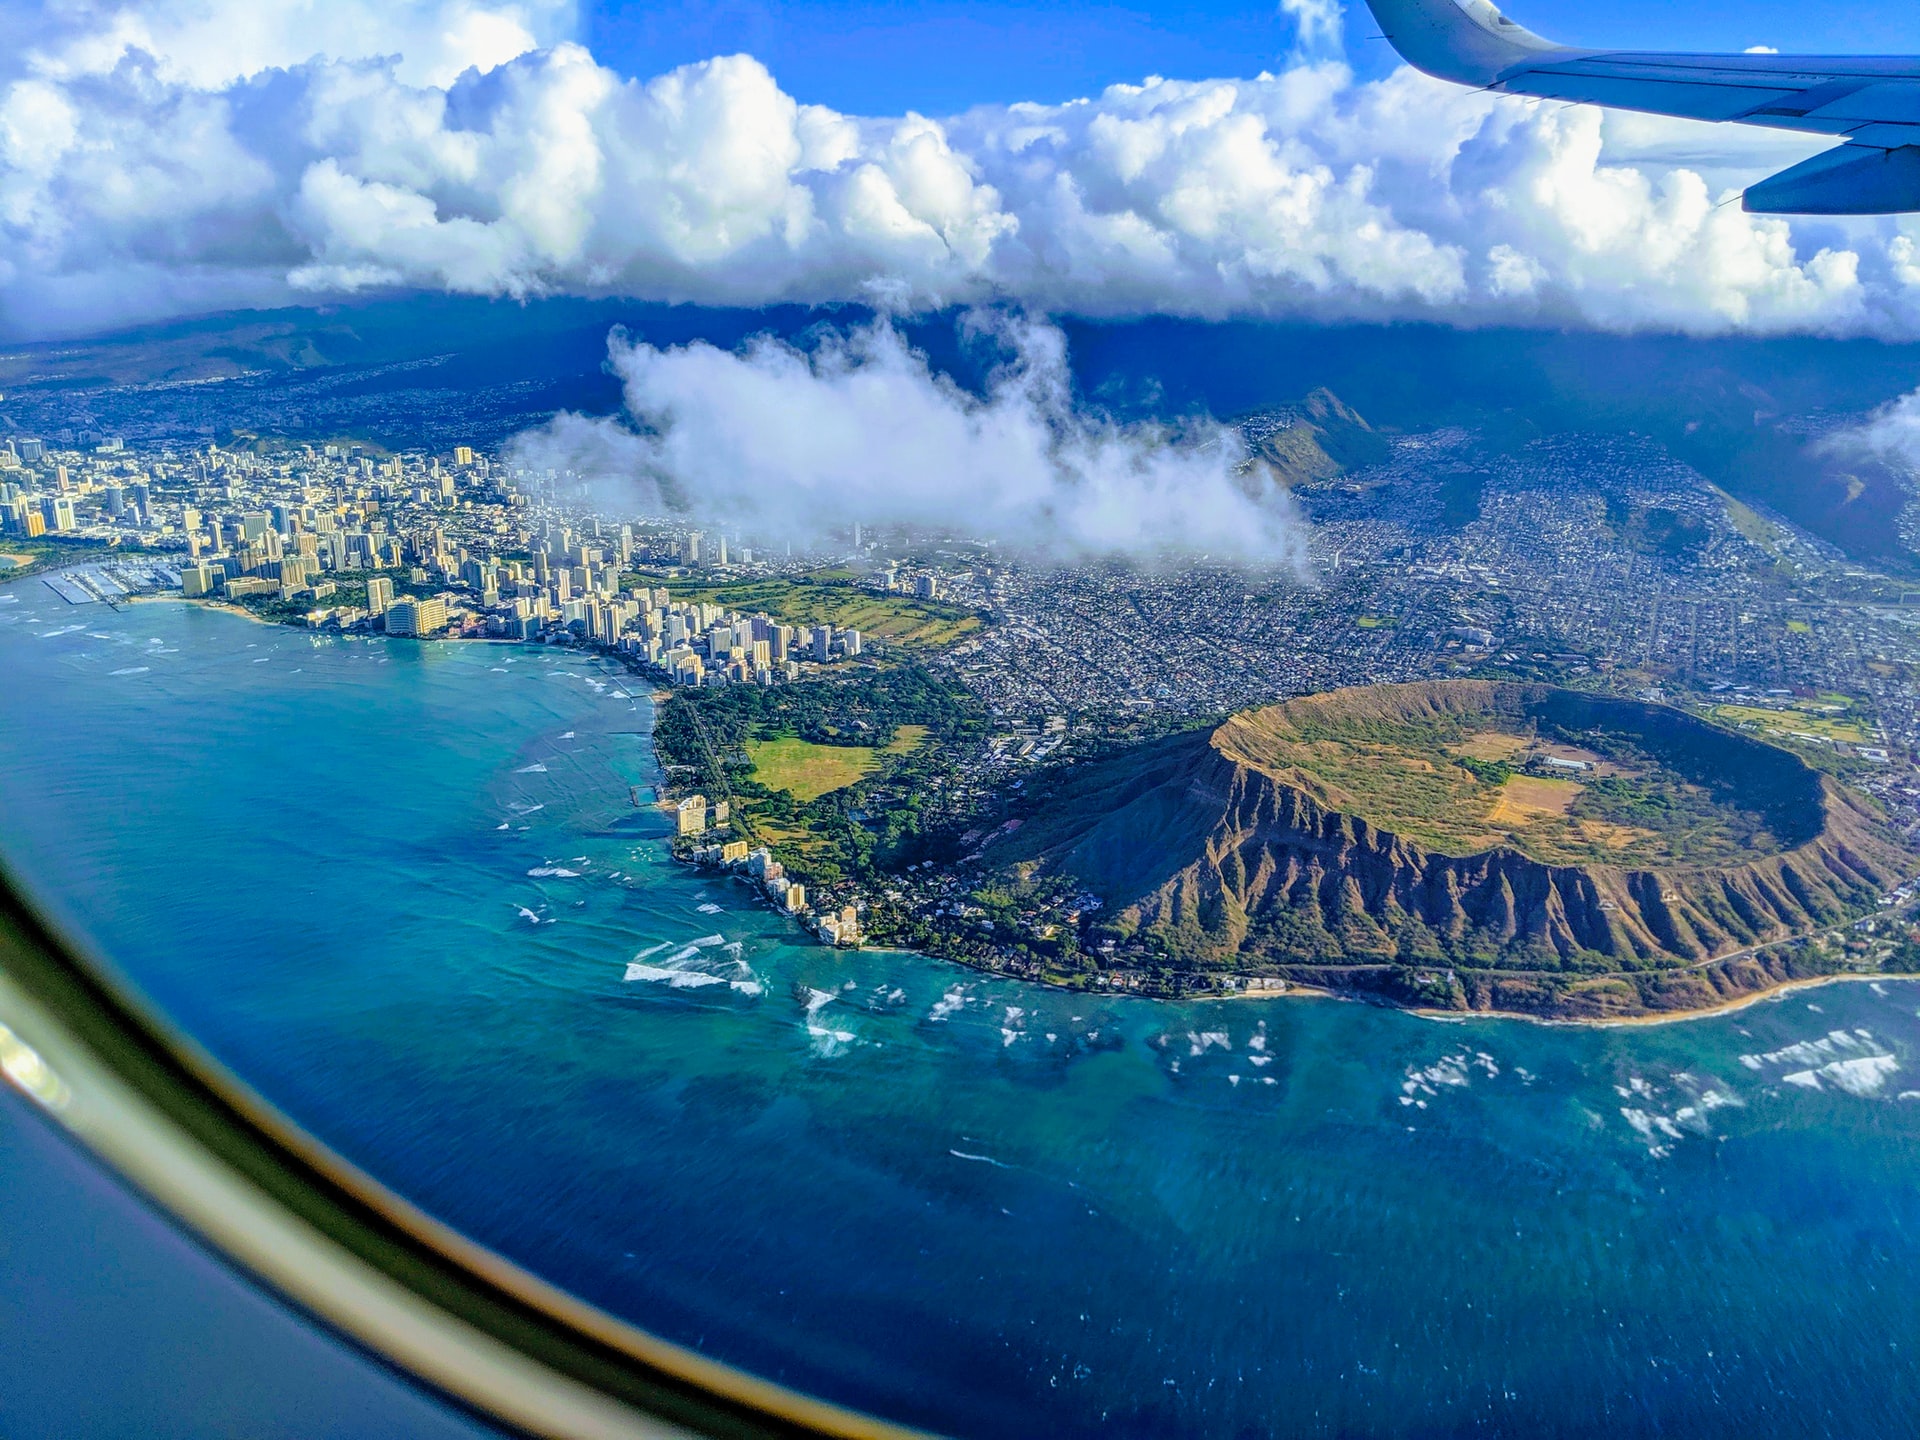 view of honolulu from the airplane